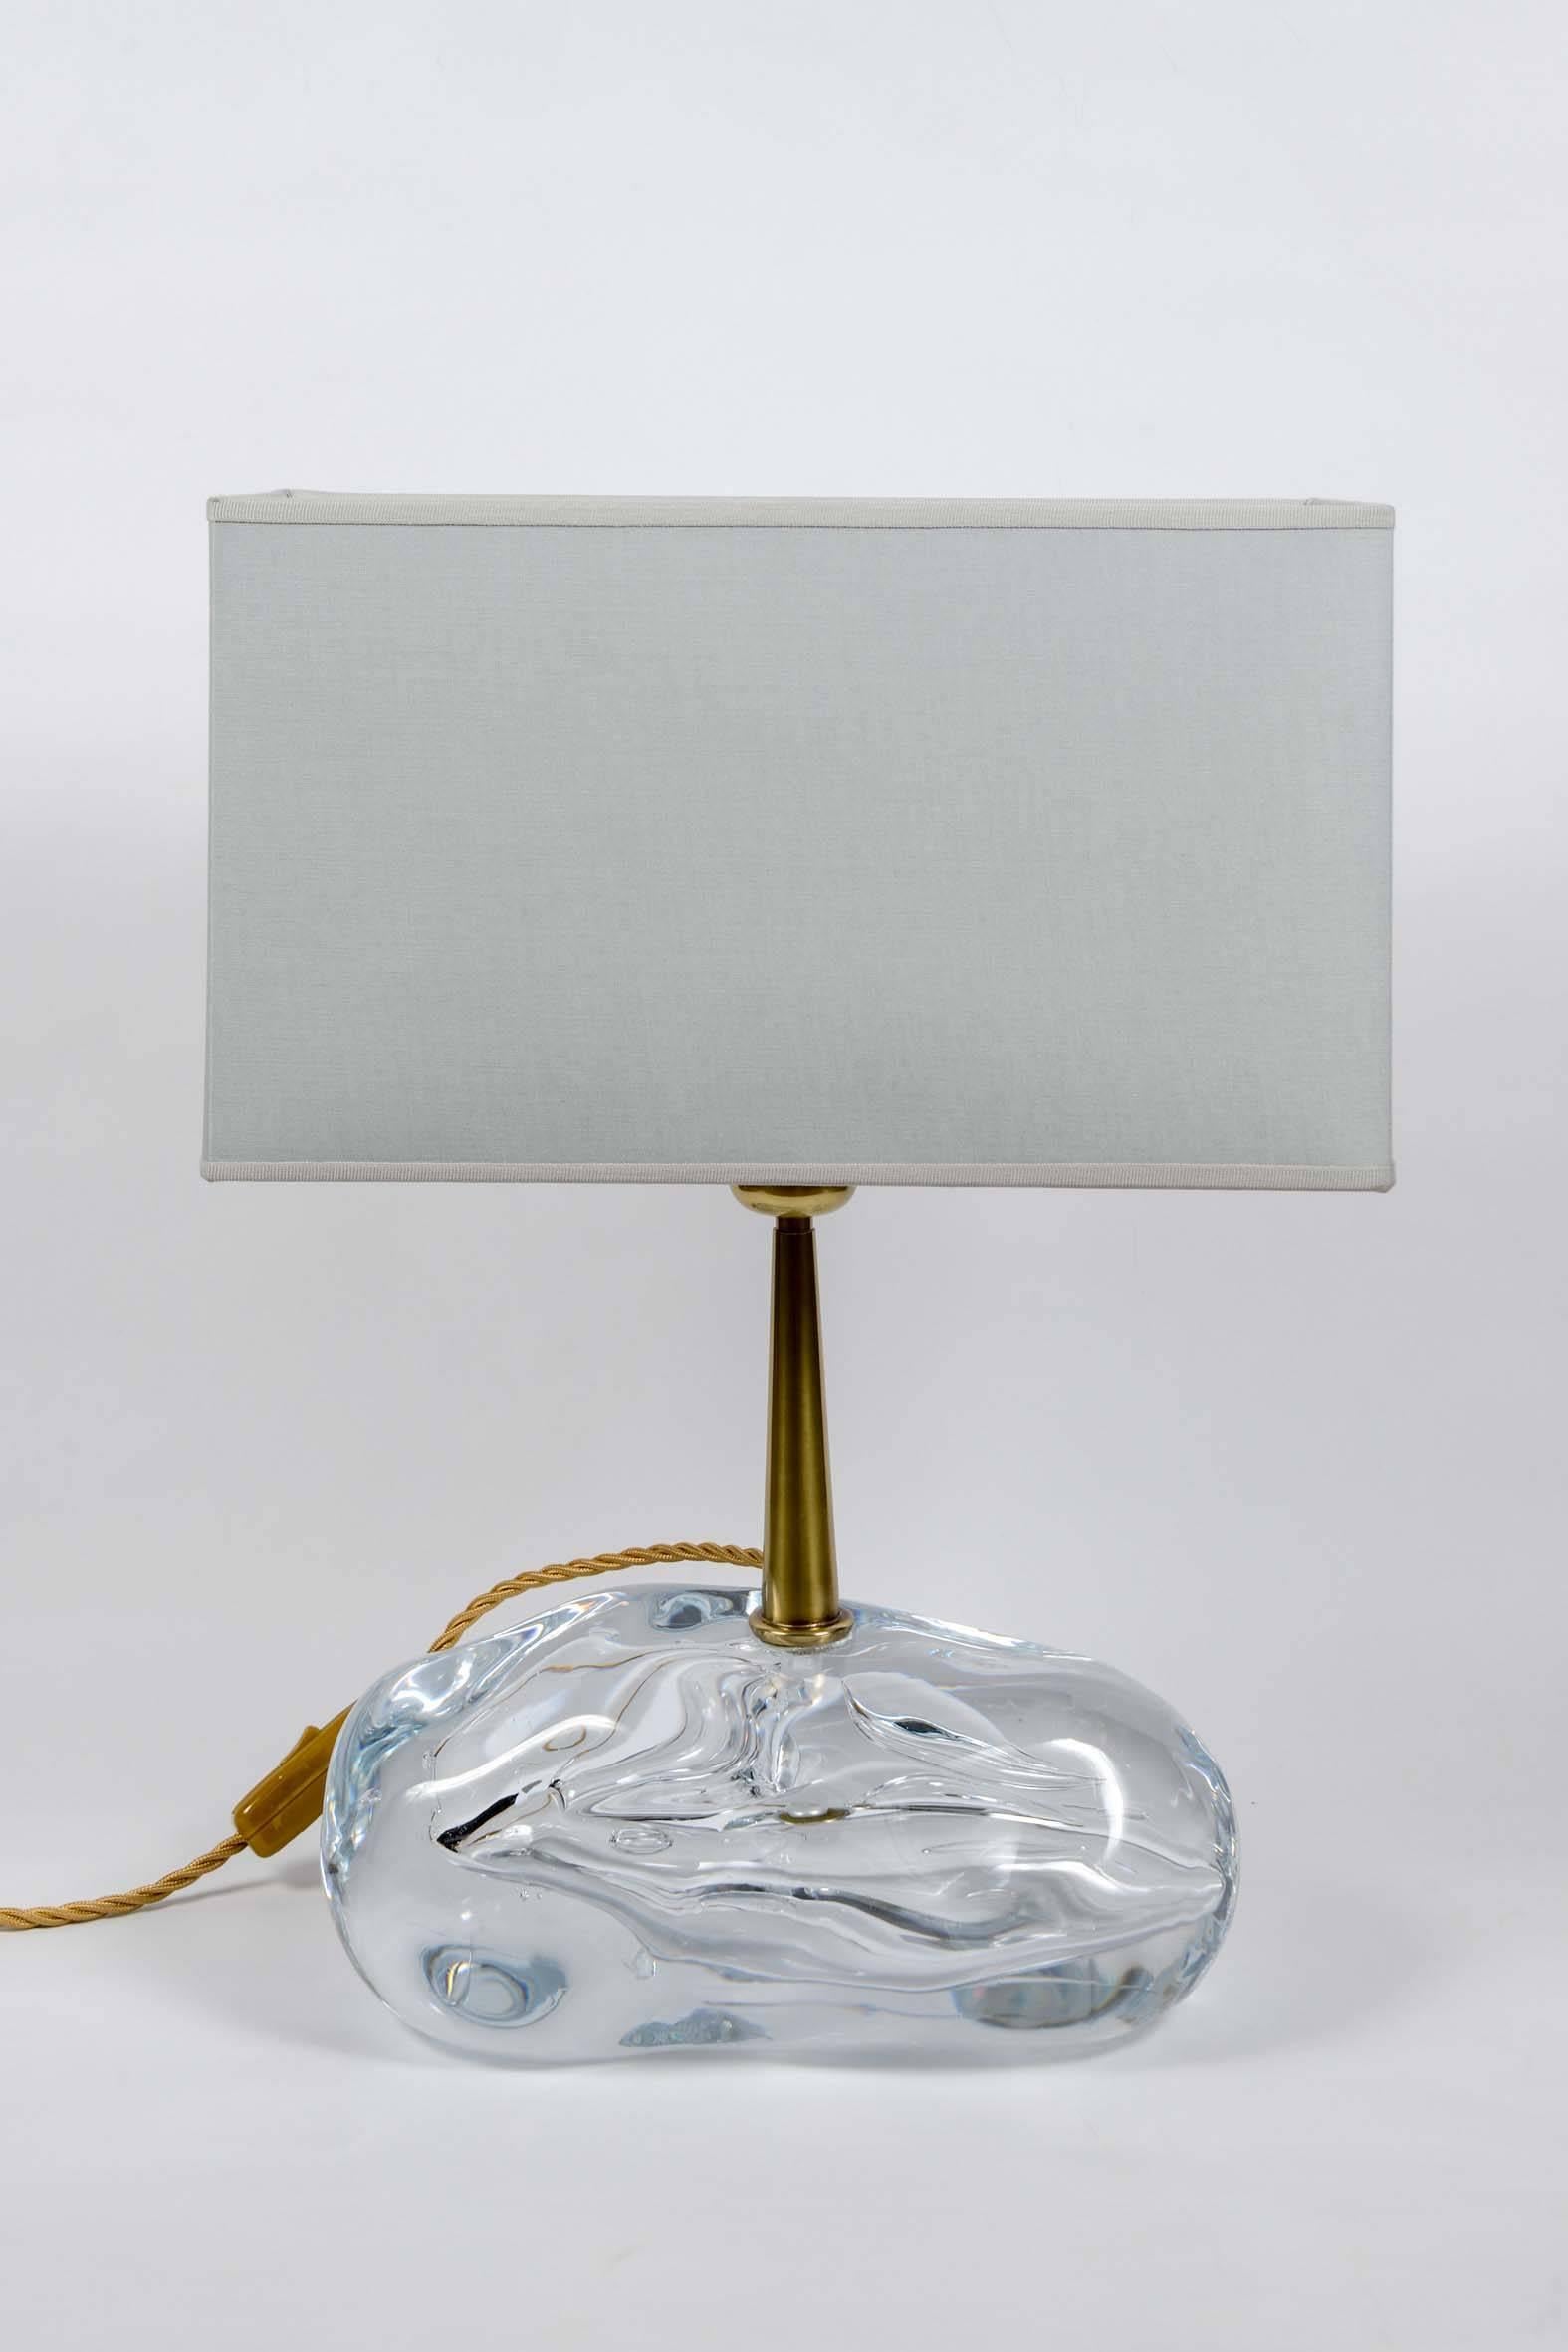 Pair of beautiful lamps made of a bloc of handmade clear glass with a brass stem holding the source of light and shade.

Esperia sticker on the socket, designed by Angelo Brotto.